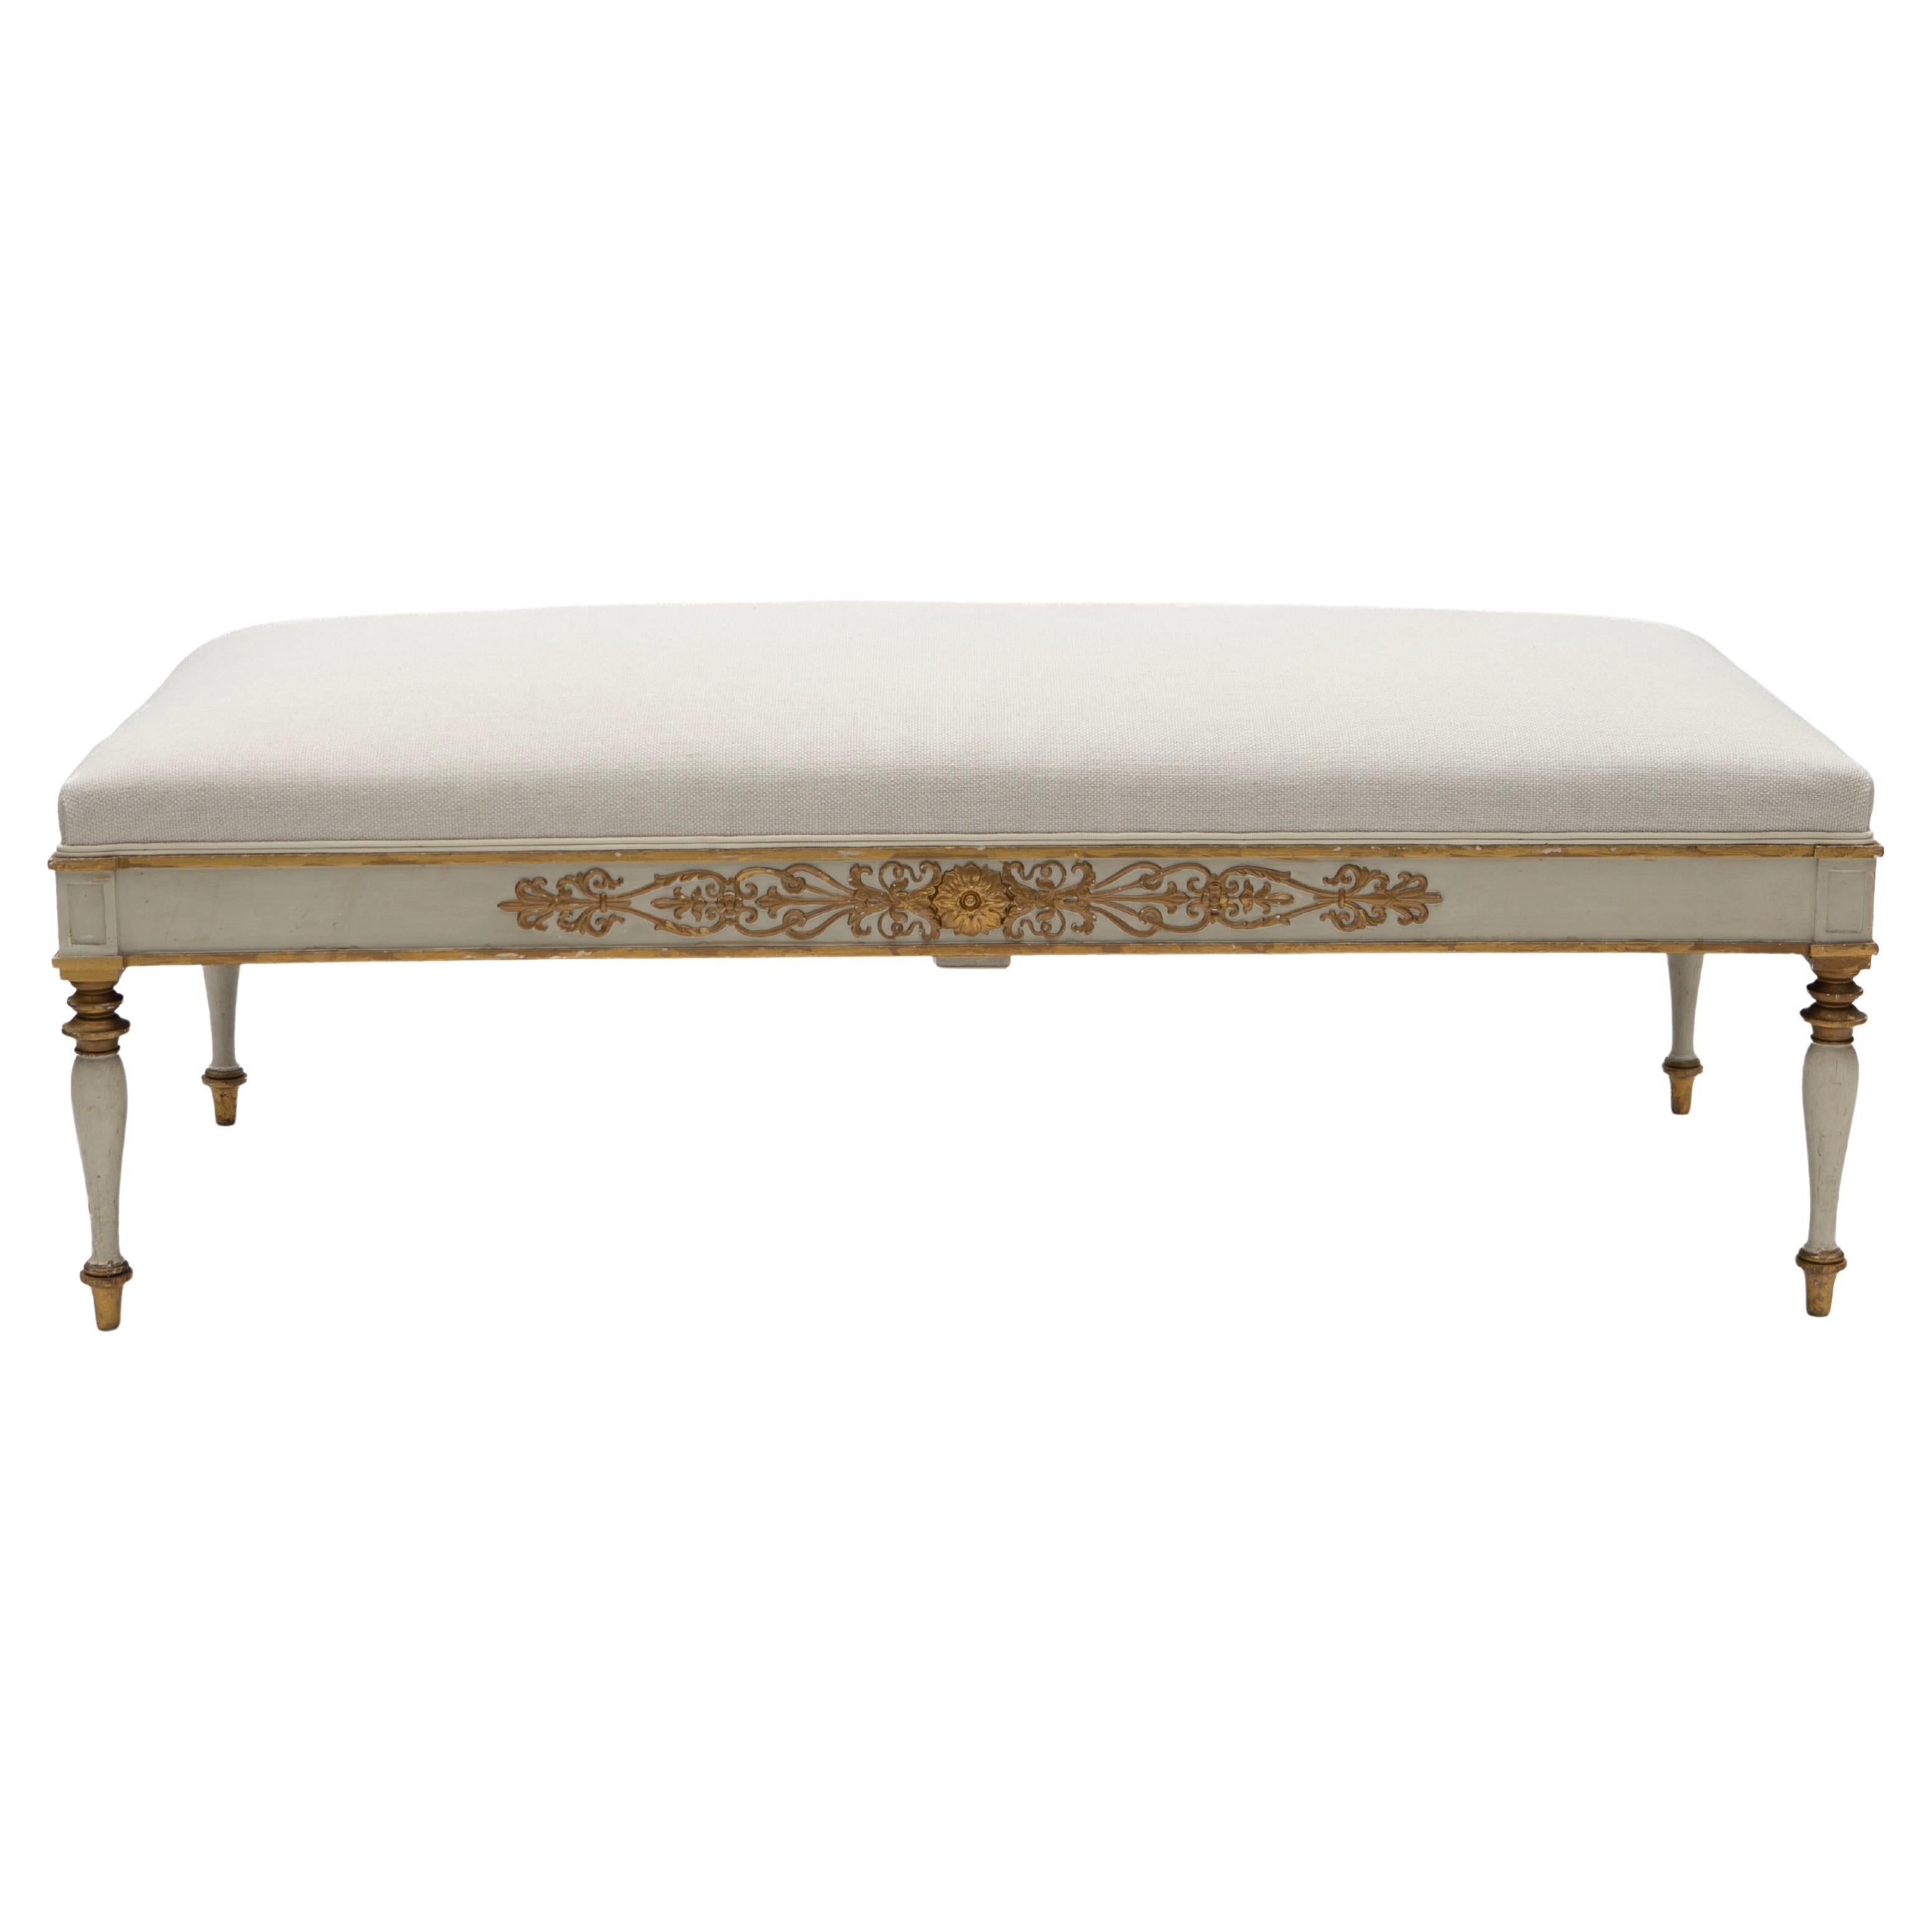 Late Empire Upholstered Bench with Carved Gilt Carvings For Sale